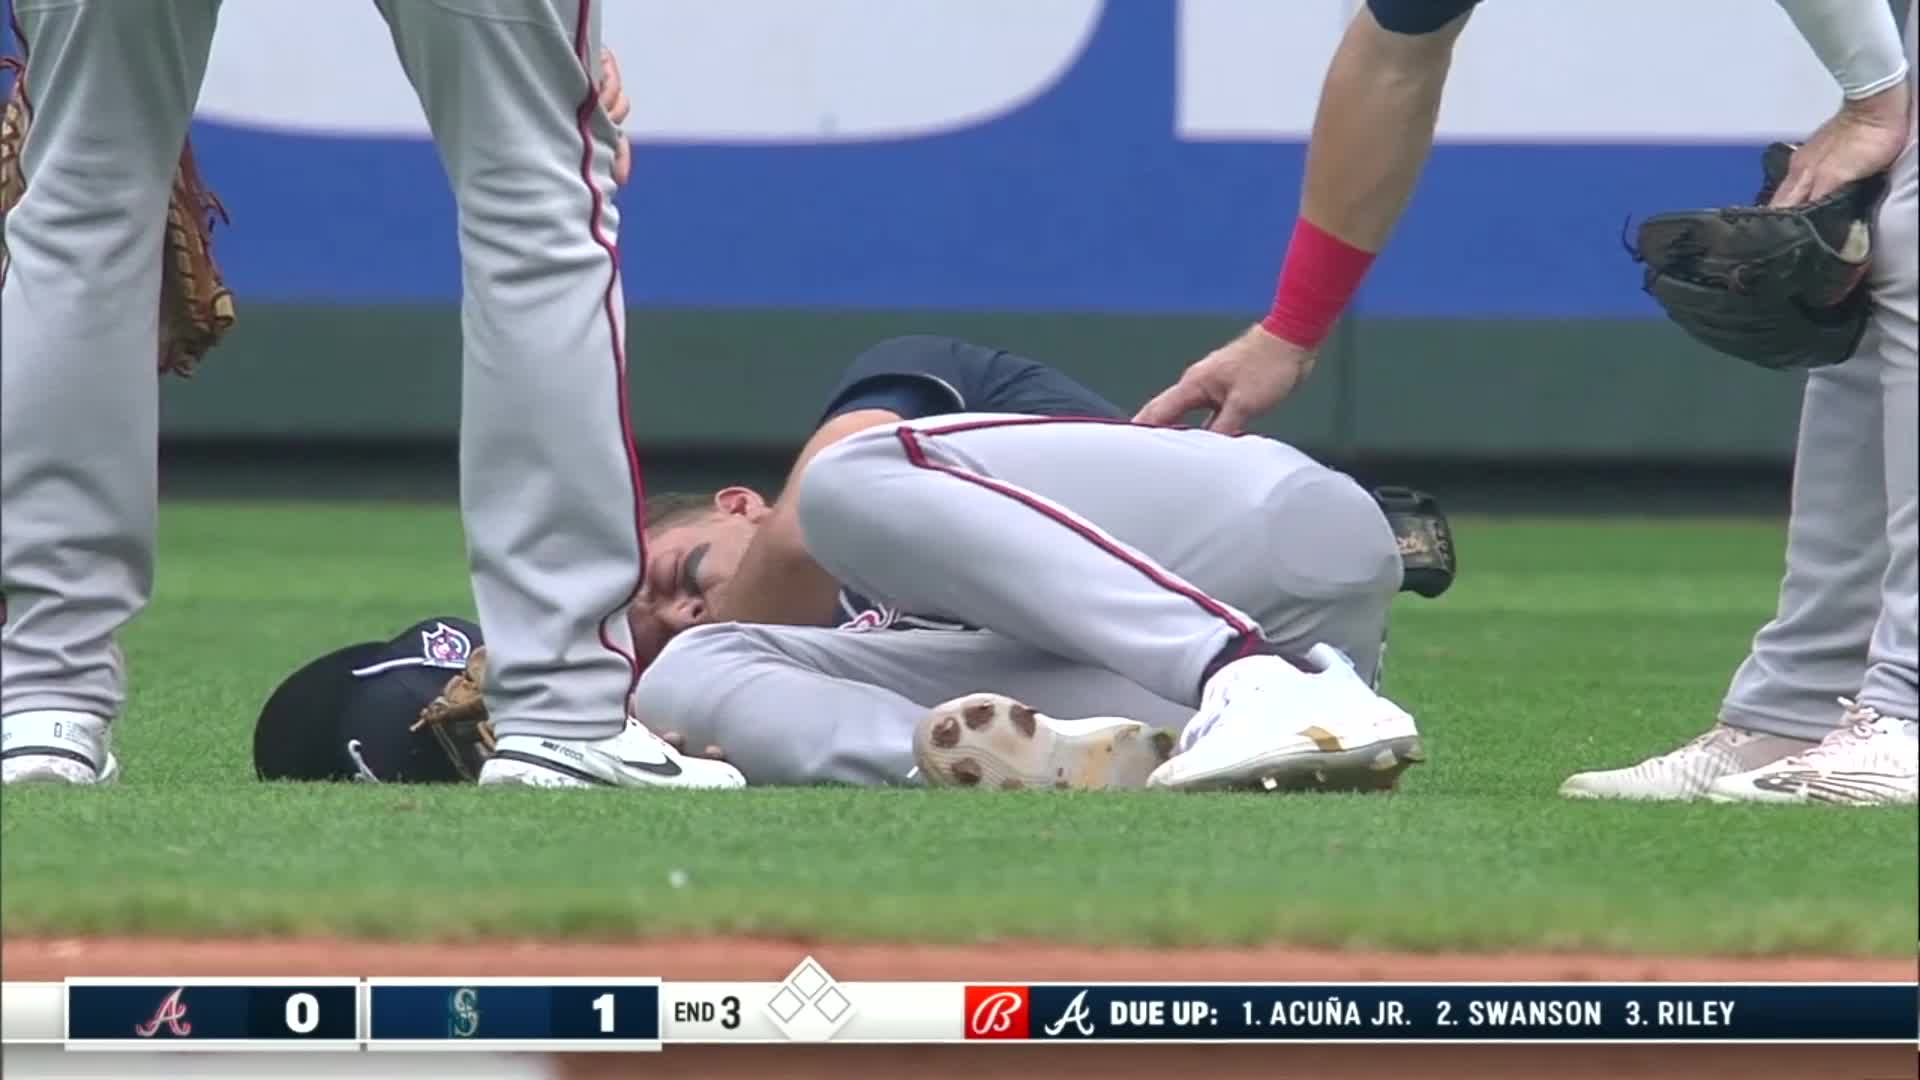 Robbie Grossman collides with Vaughn Grissom who's on the ground in  considerable pain. : r/baseball